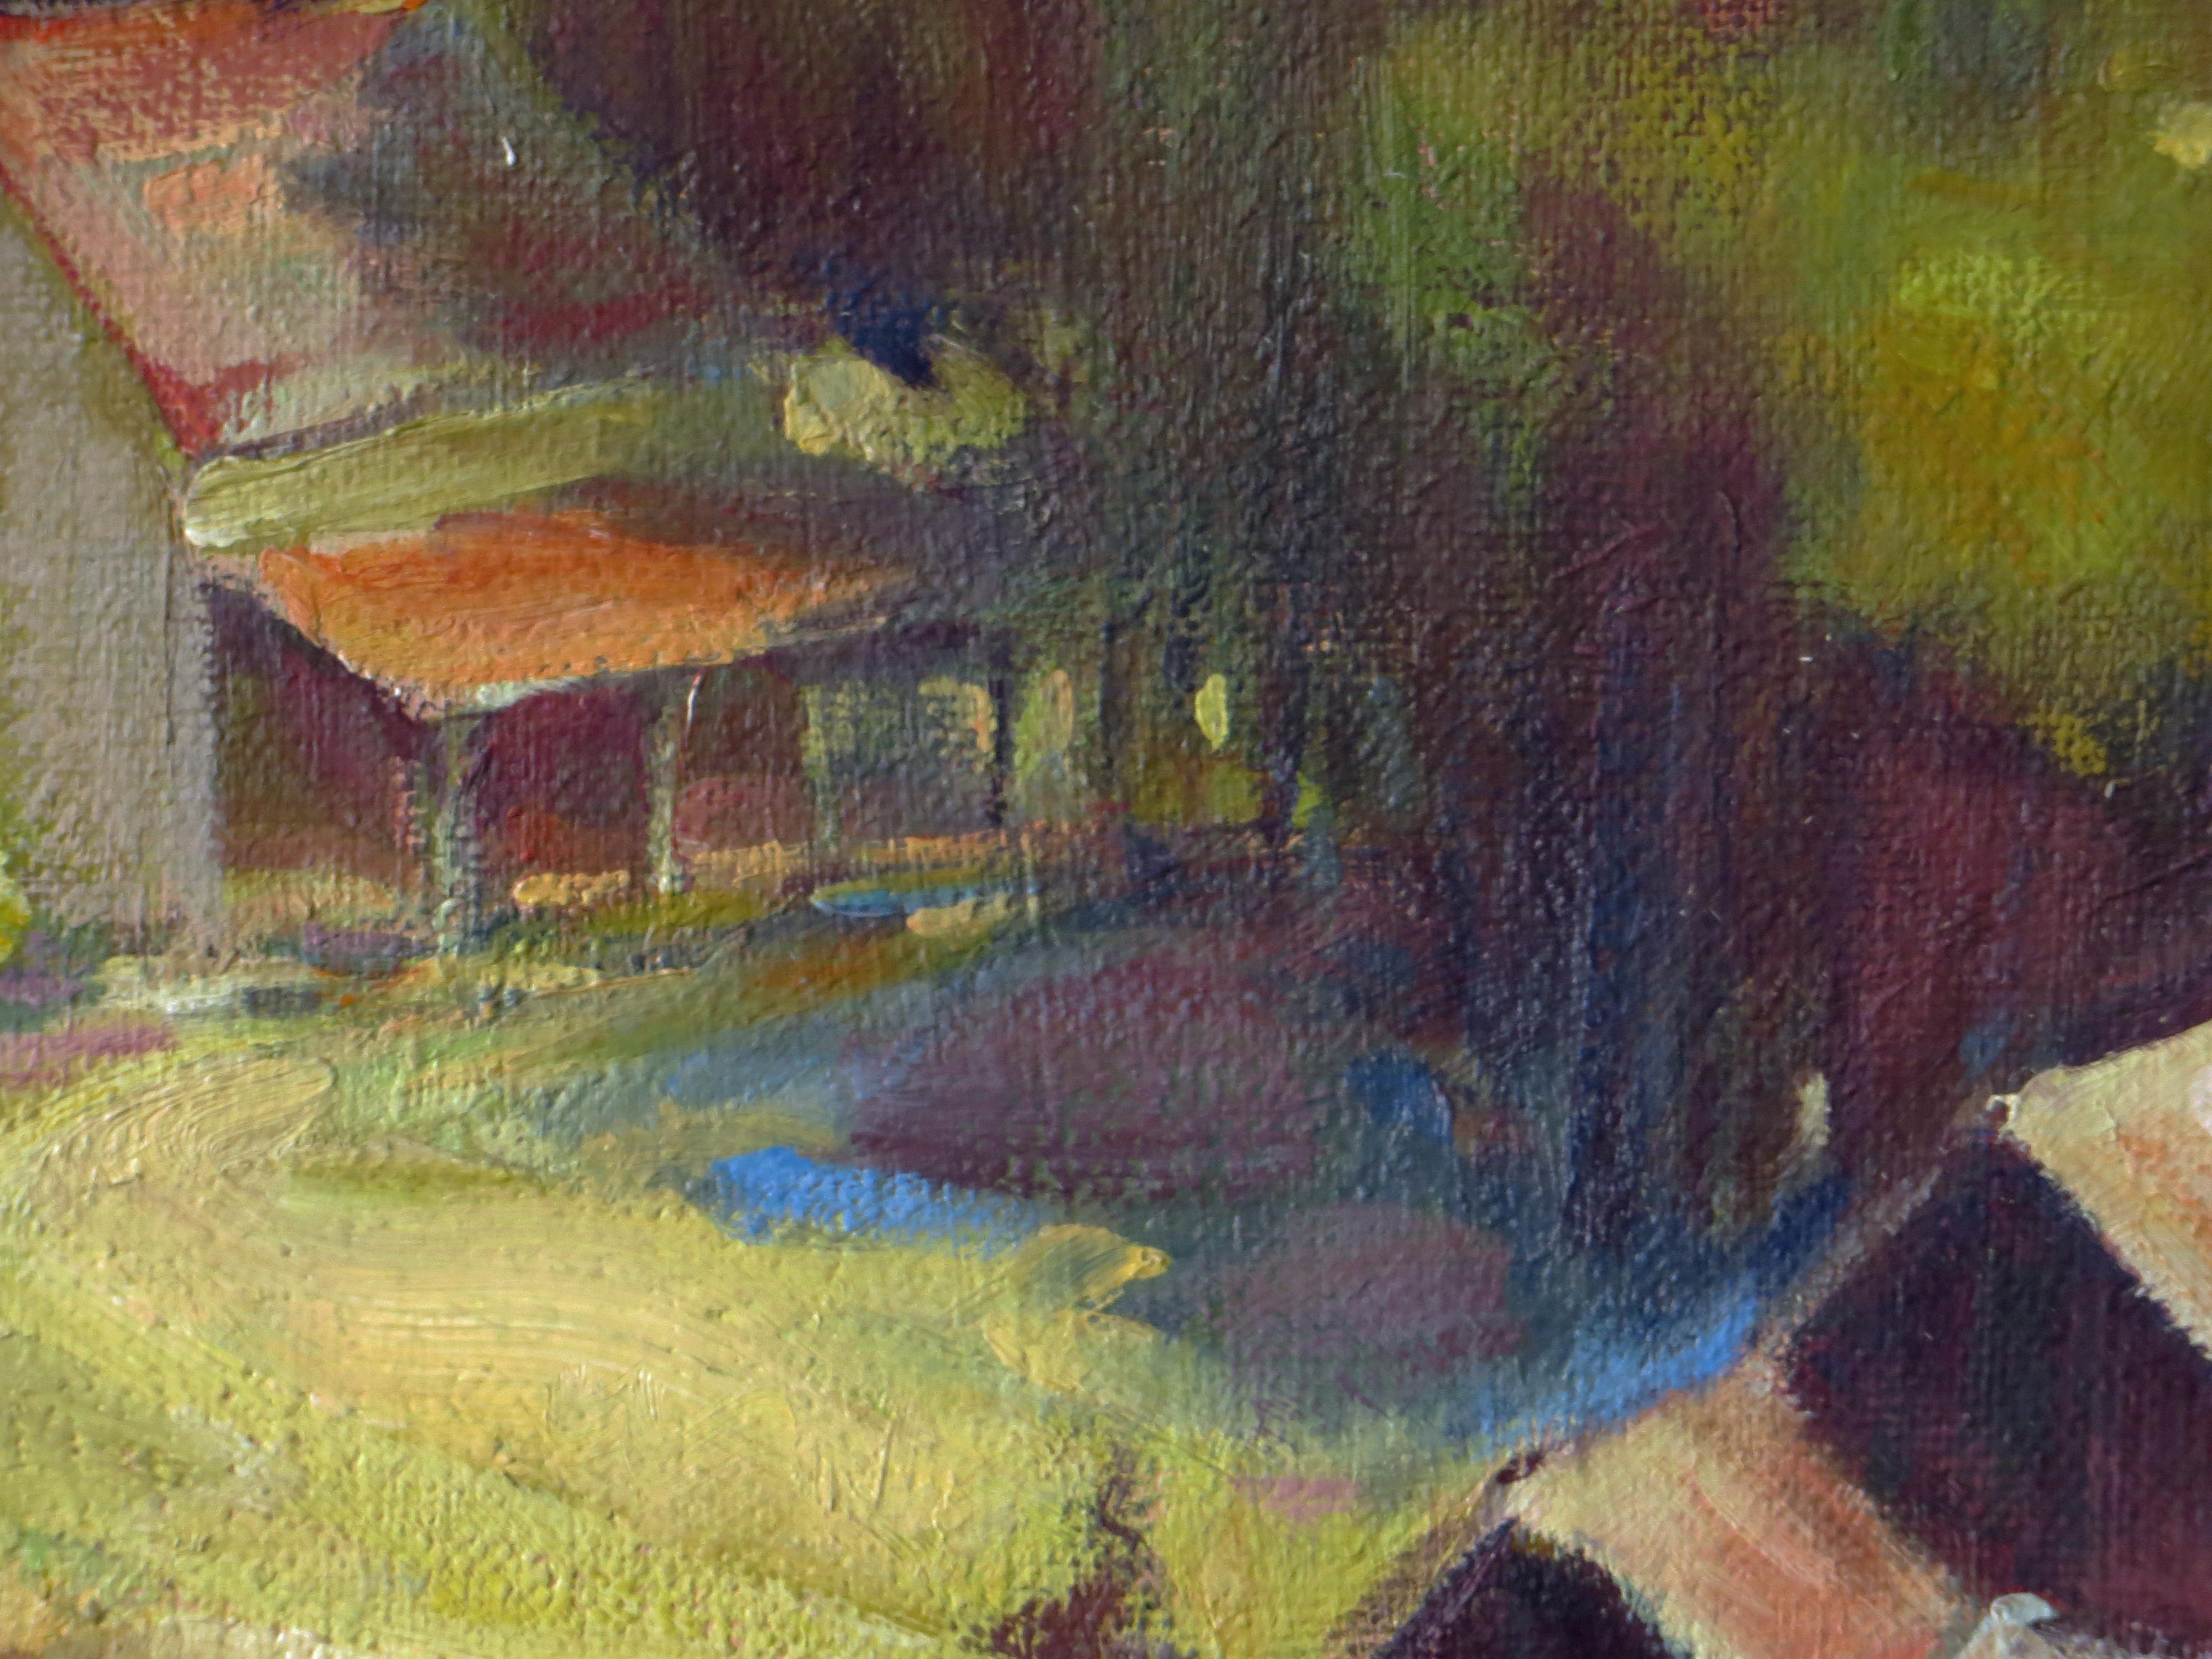 Bucolic Landscape by Bohemian Club Member  - Impressionist Painting by Rene Weaver